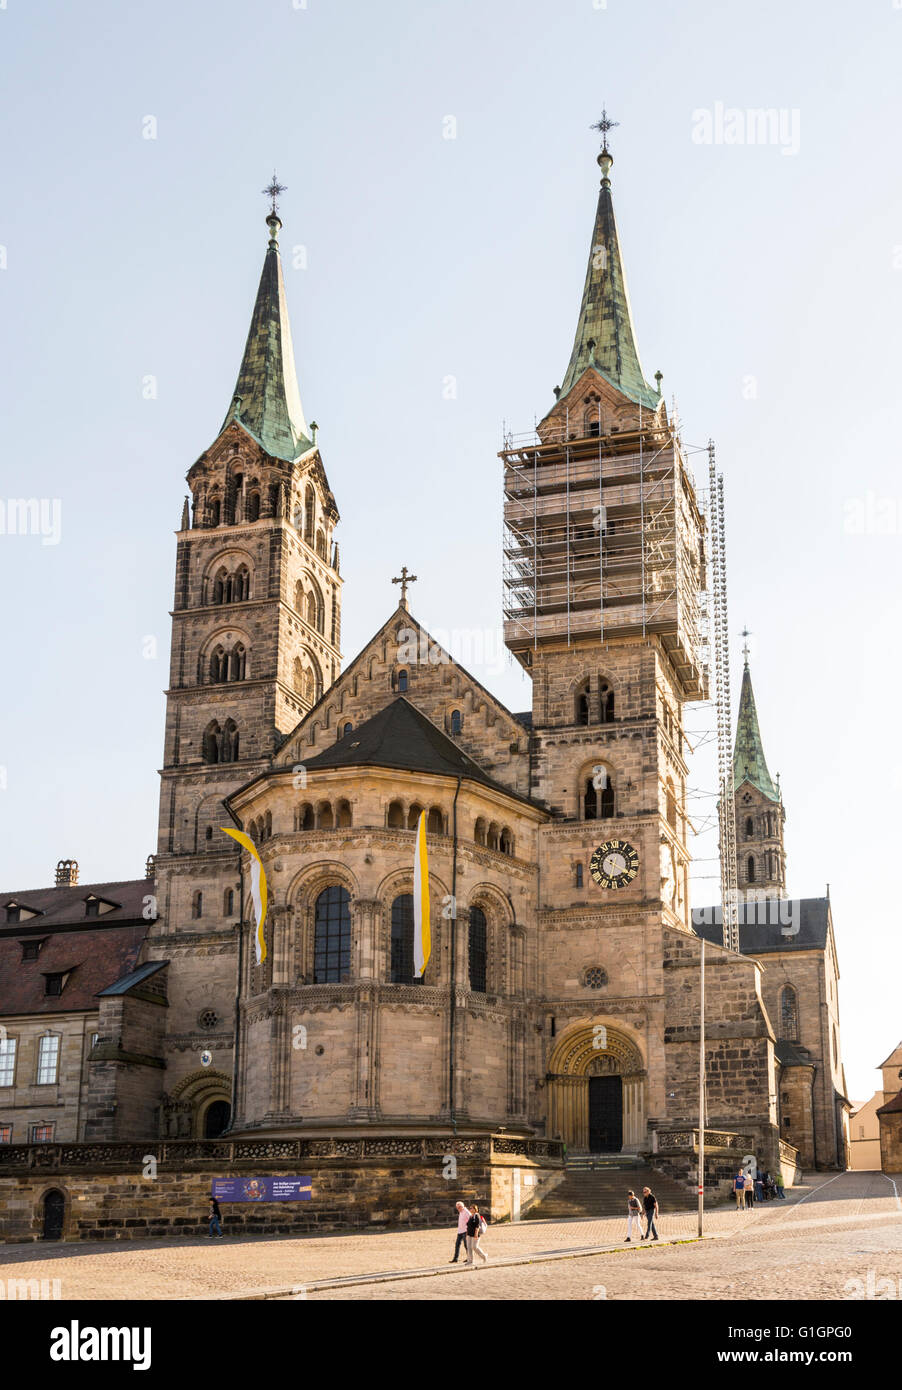 BAMBERG, GERMANY - MAI 6: Tourists at the cathedral in Bamberg, Germany on Mai 6, 2016. Stock Photo